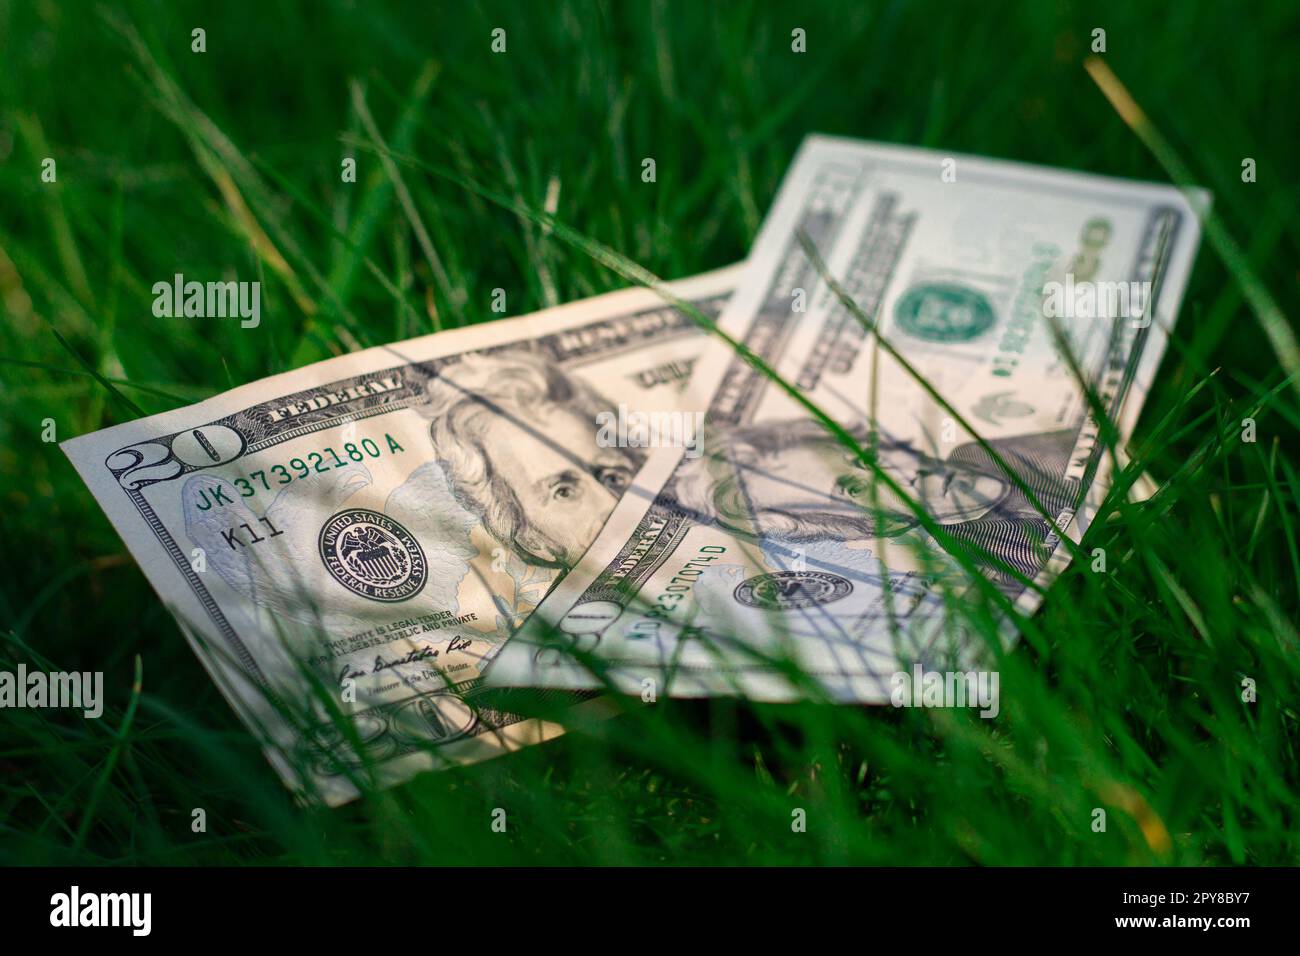 Two 20 US dollar bills lie on a background of green grass. Money lying on the ground. Stock Photo